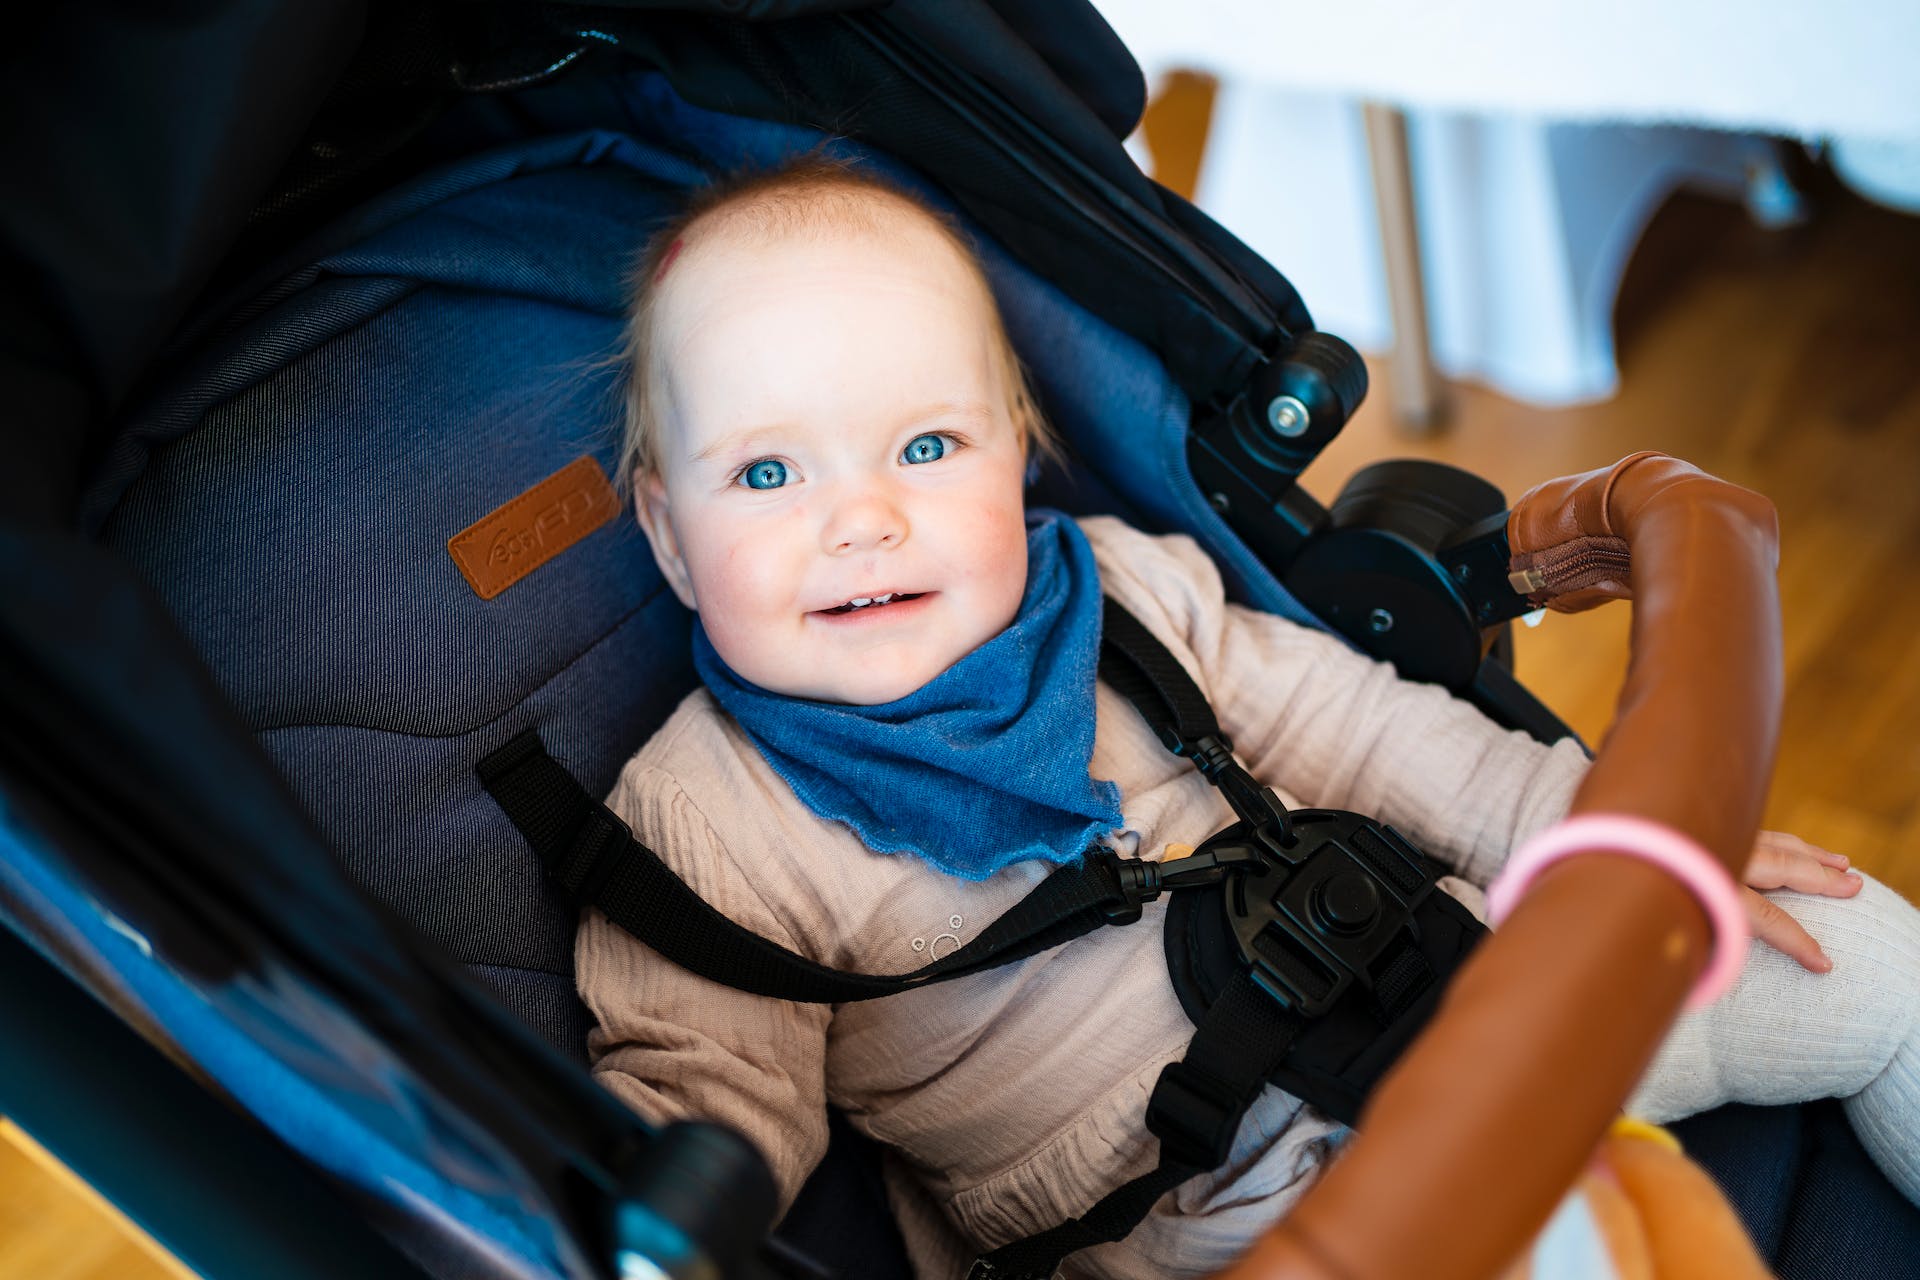 Smiling baby sits in stroller